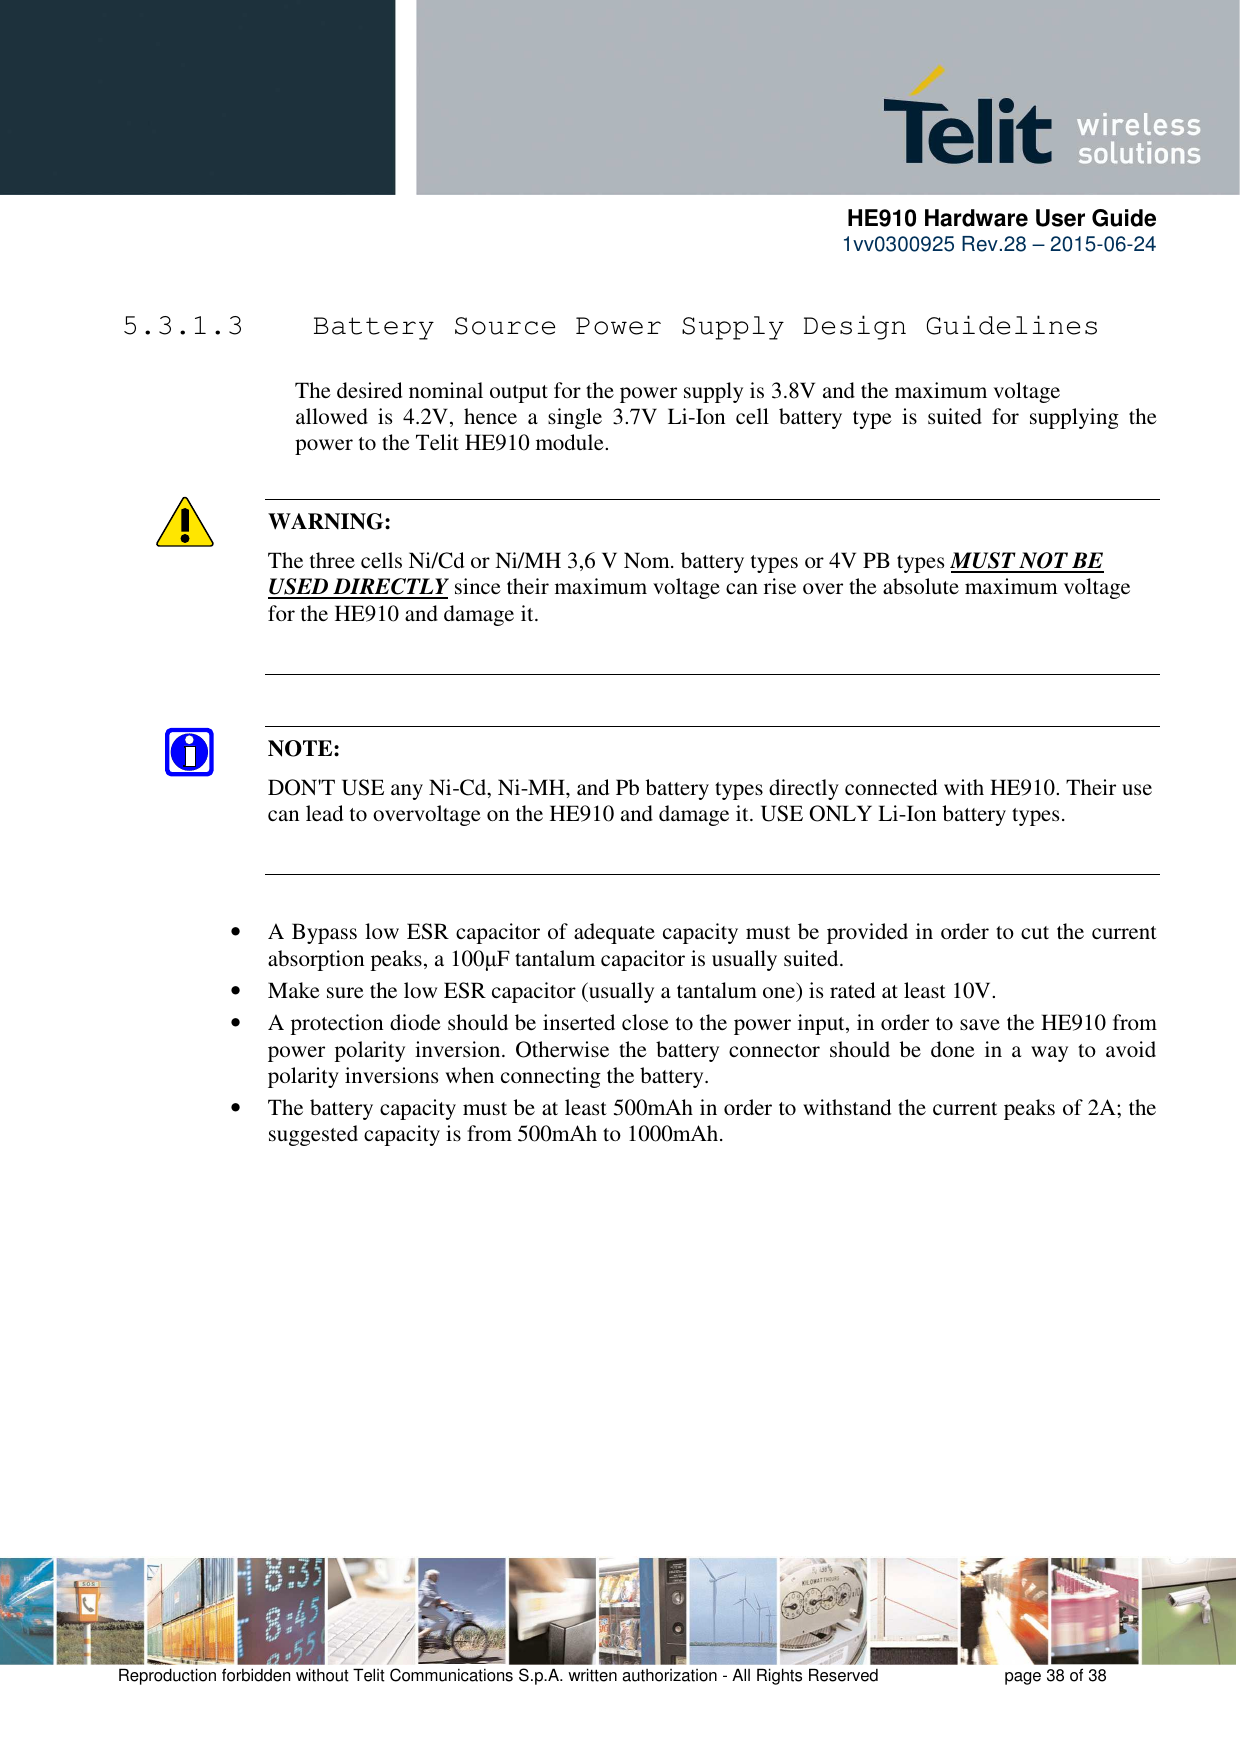      HE910 Hardware User Guide 1vv0300925 Rev.28 – 2015-06-24    Reproduction forbidden without Telit Communications S.p.A. written authorization - All Rights Reserved    page 38 of 38   5.3.1.3  Battery Source Power Supply Design Guidelines        The desired nominal output for the power supply is 3.8V and the maximum voltage      allowed  is  4.2V,  hence  a  single  3.7V  Li-Ion  cell  battery  type  is  suited  for  supplying  the     power to the Telit HE910 module.  WARNING: The three cells Ni/Cd or Ni/MH 3,6 V Nom. battery types or 4V PB types MUST NOT BE USED DIRECTLY since their maximum voltage can rise over the absolute maximum voltage for the HE910 and damage it.   NOTE: DON&apos;T USE any Ni-Cd, Ni-MH, and Pb battery types directly connected with HE910. Their use can lead to overvoltage on the HE910 and damage it. USE ONLY Li-Ion battery types.   • A Bypass low ESR capacitor of adequate capacity must be provided in order to cut the current absorption peaks, a 100µF tantalum capacitor is usually suited. • Make sure the low ESR capacitor (usually a tantalum one) is rated at least 10V. • A protection diode should be inserted close to the power input, in order to save the HE910 from power  polarity  inversion.  Otherwise the  battery  connector  should  be  done  in a  way  to  avoid polarity inversions when connecting the battery. • The battery capacity must be at least 500mAh in order to withstand the current peaks of 2A; the suggested capacity is from 500mAh to 1000mAh. 